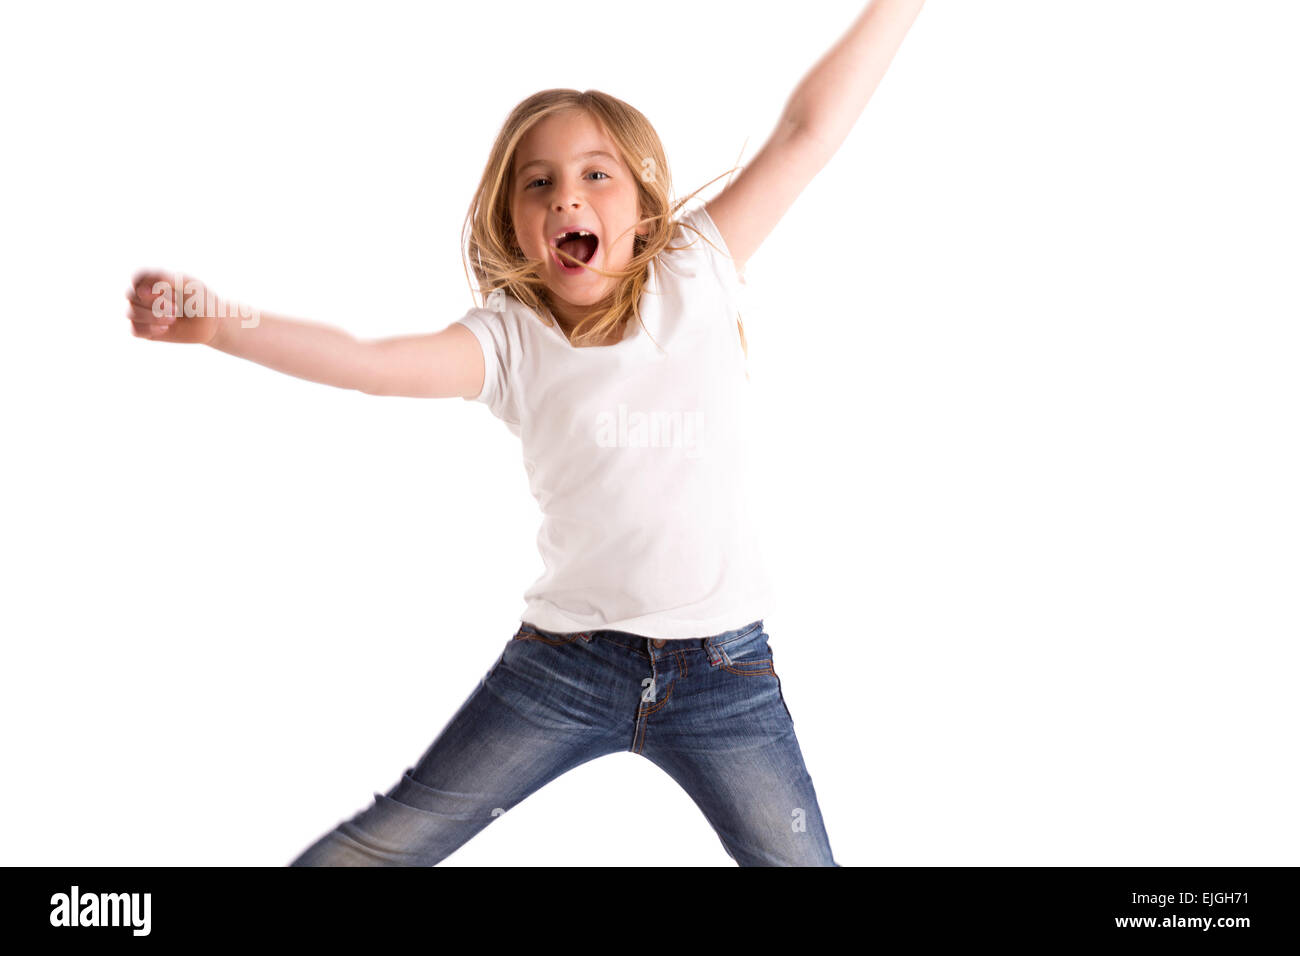 blond kid girl indented jumping high wind on hair denim jeans at white background Stock Photo